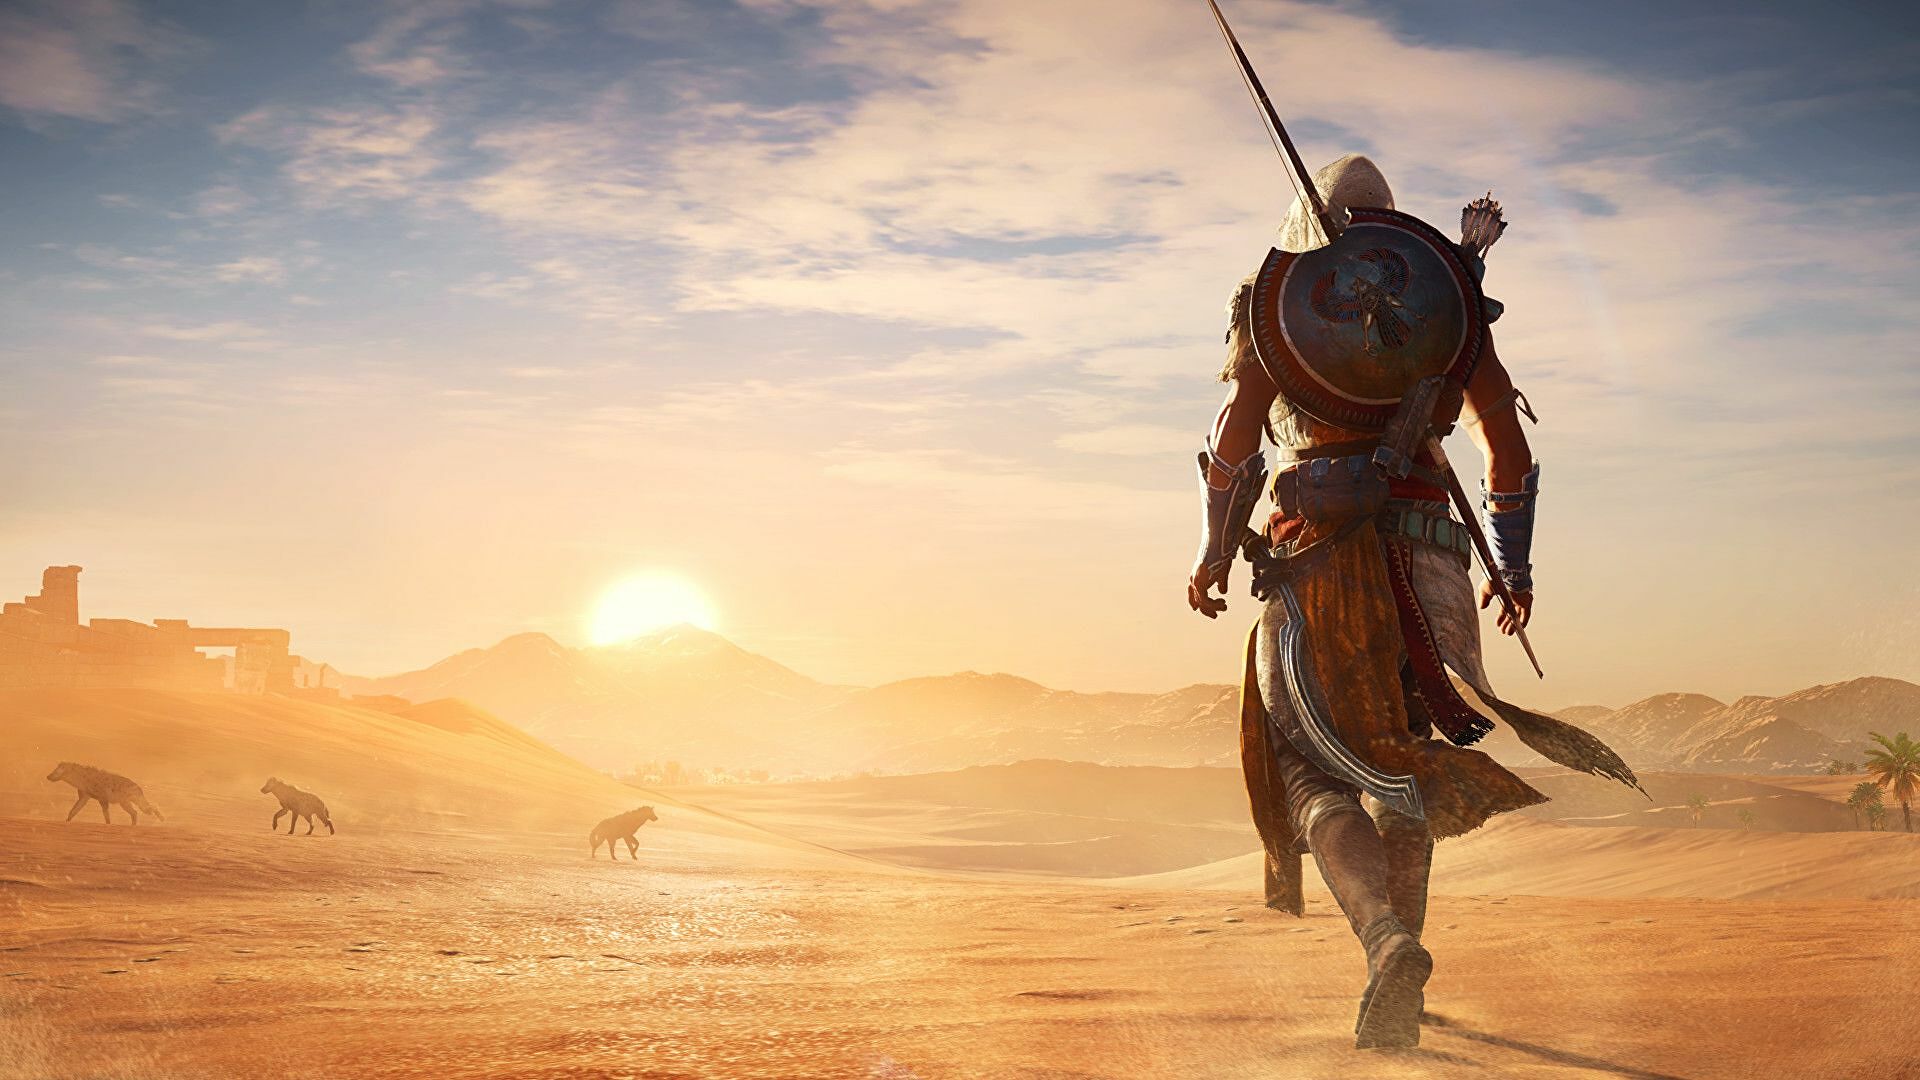 Image for Looks like Assassin's Creed Origins gets 60fps PS5, Xbox Series X/S update soon